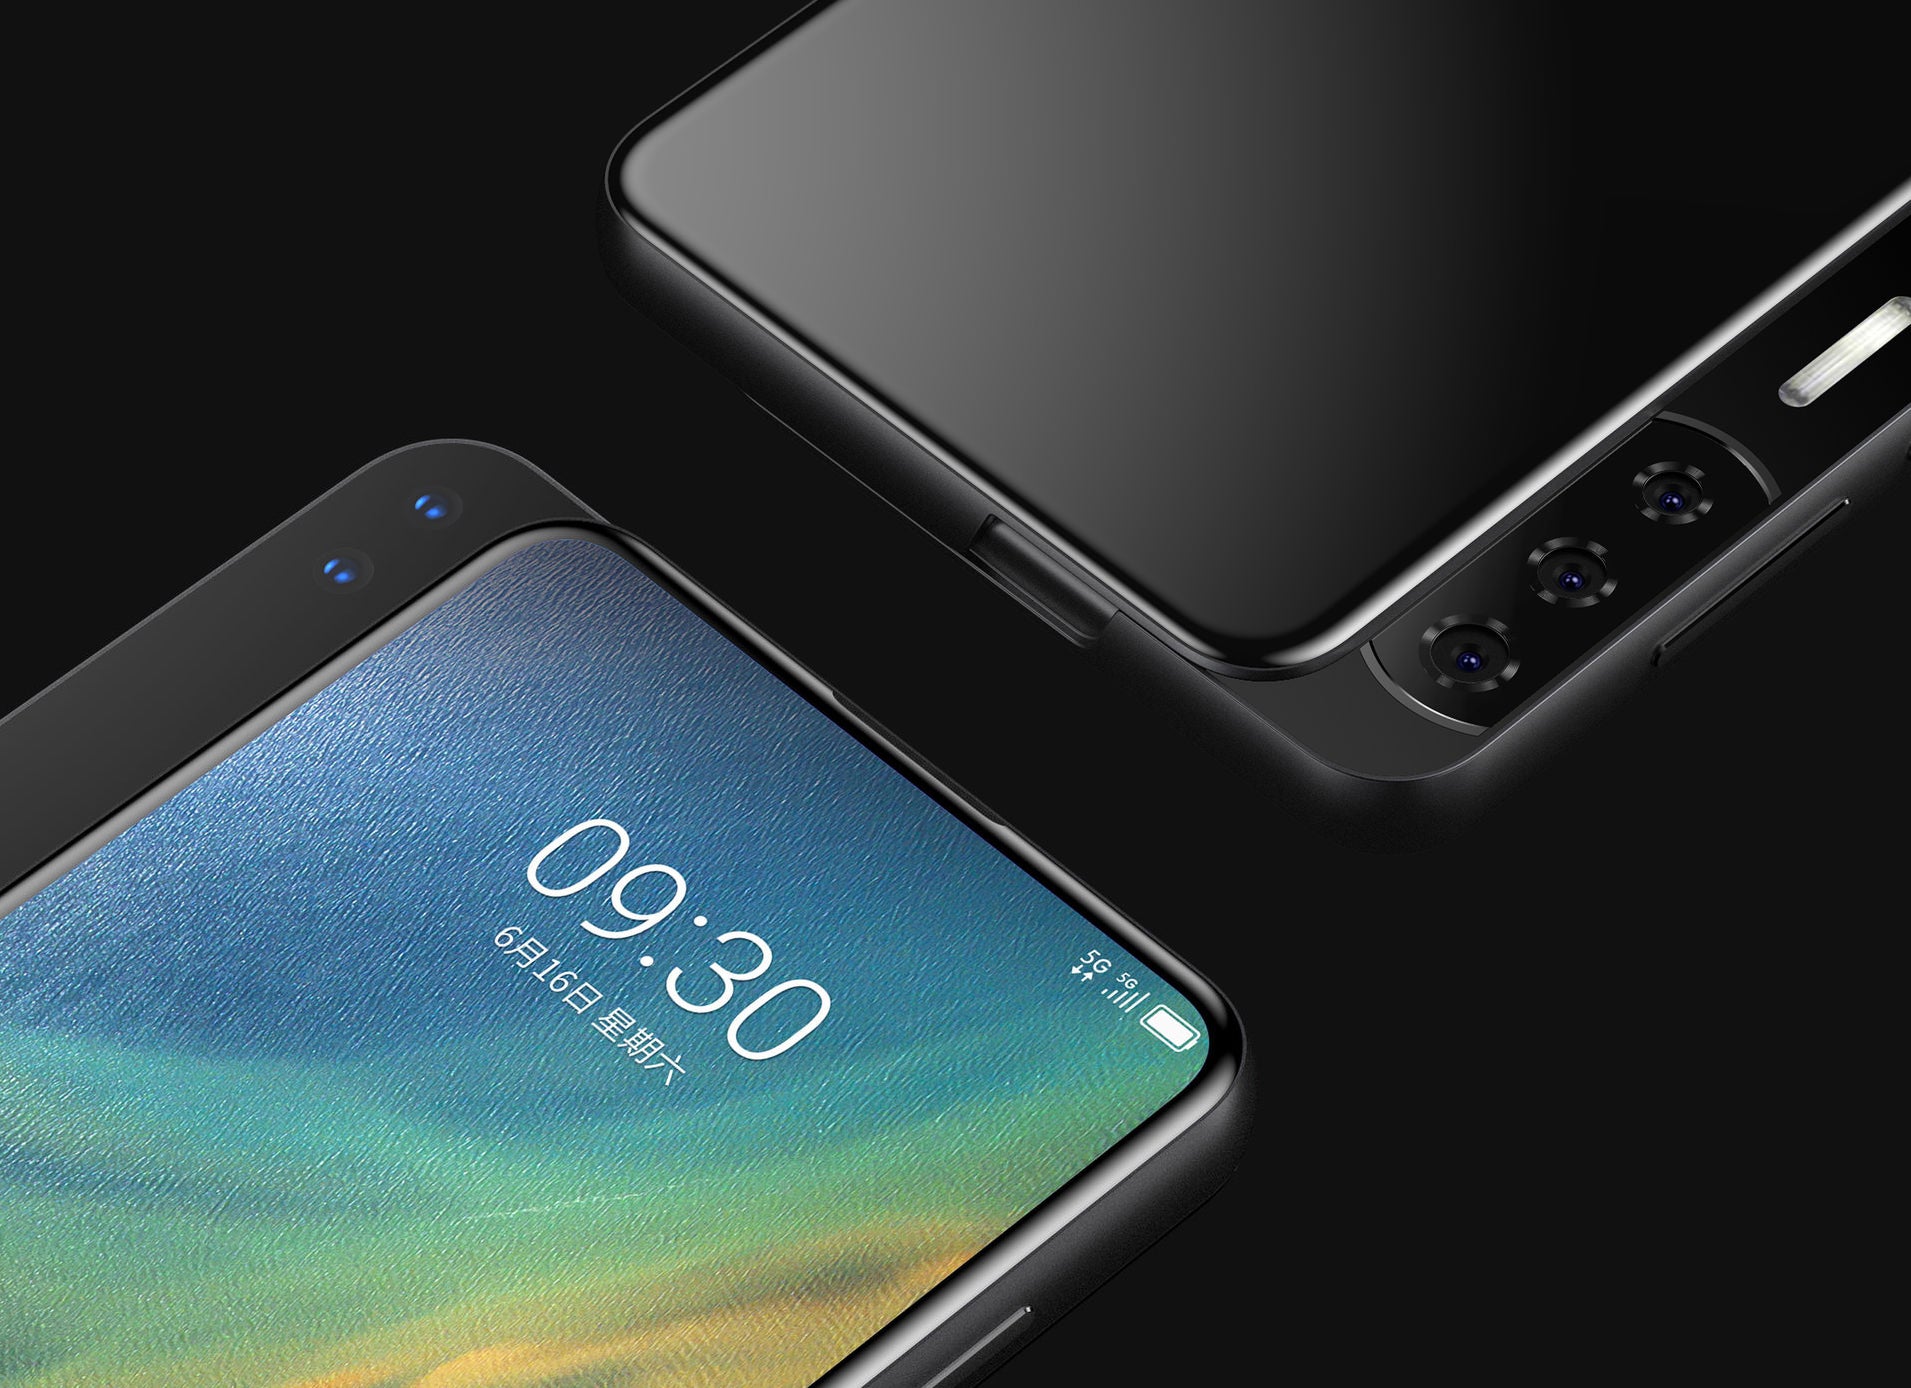 Another render of the ZTE Axon S - Renders show two new ZTE concept phones that are practically all screen